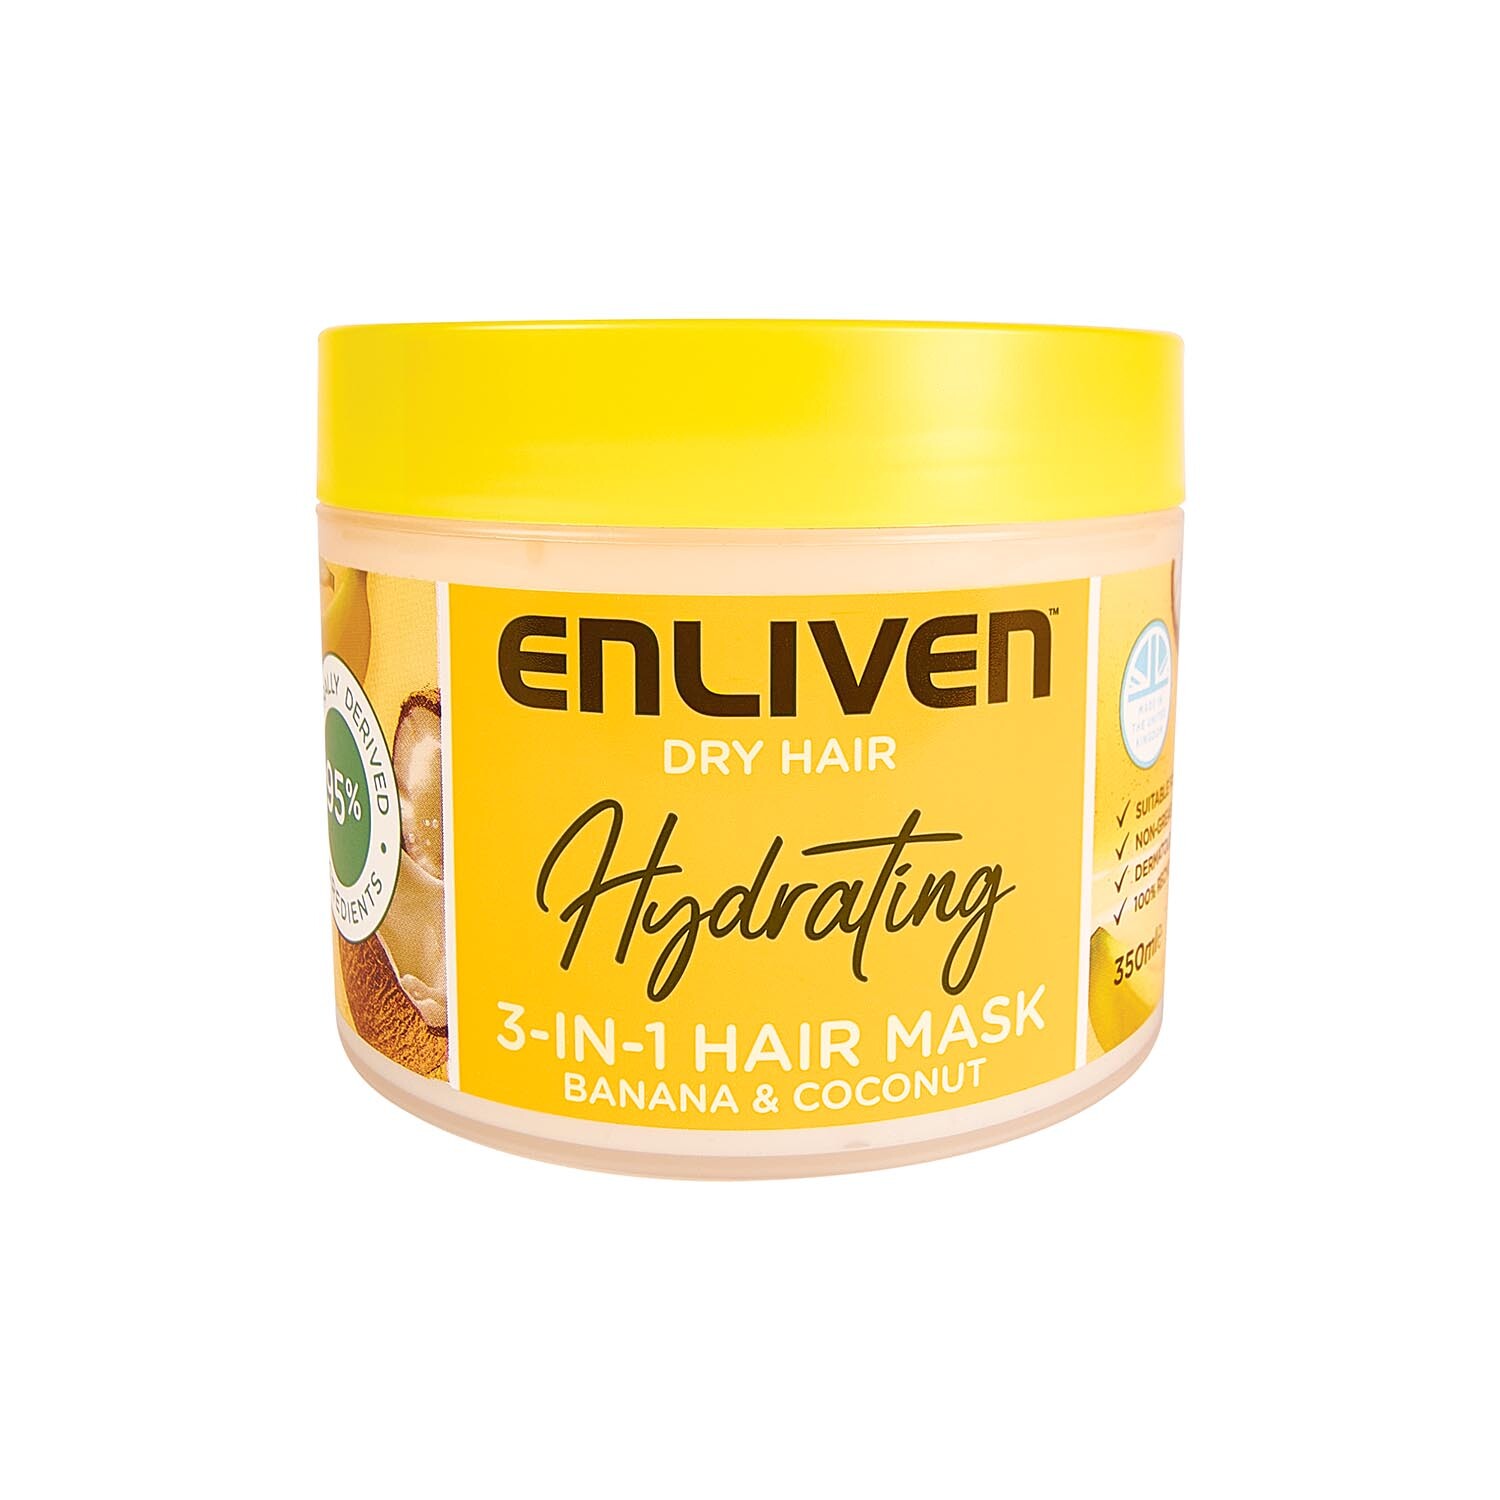 Enliven Hydrating 3-in-1 Hair Mask Image